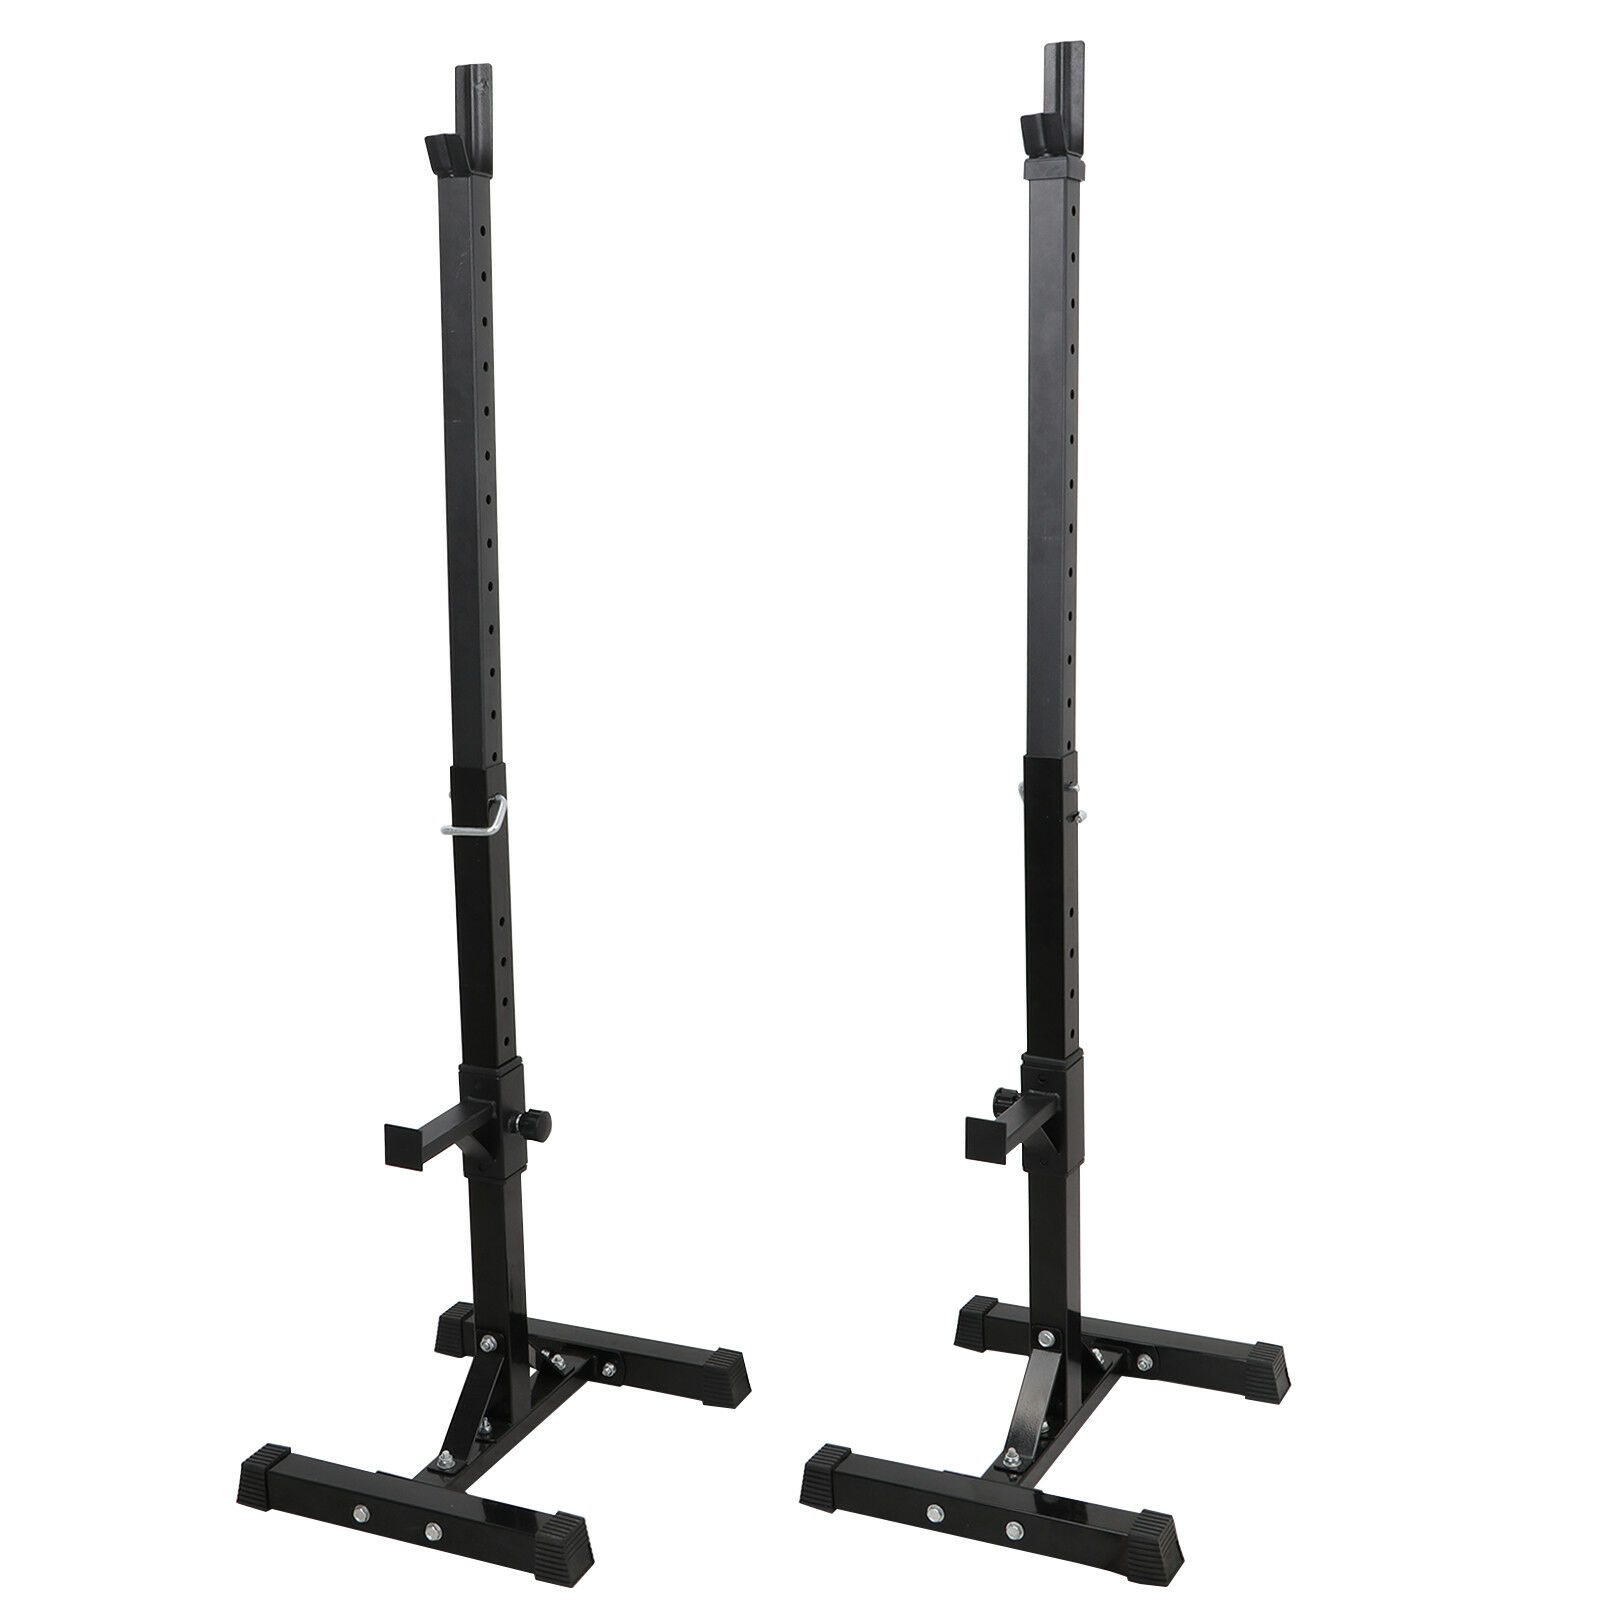 ZENSTYLE Pair of Adjustable Independent Squat Stand is another popular option for those looking for squat stand below $150